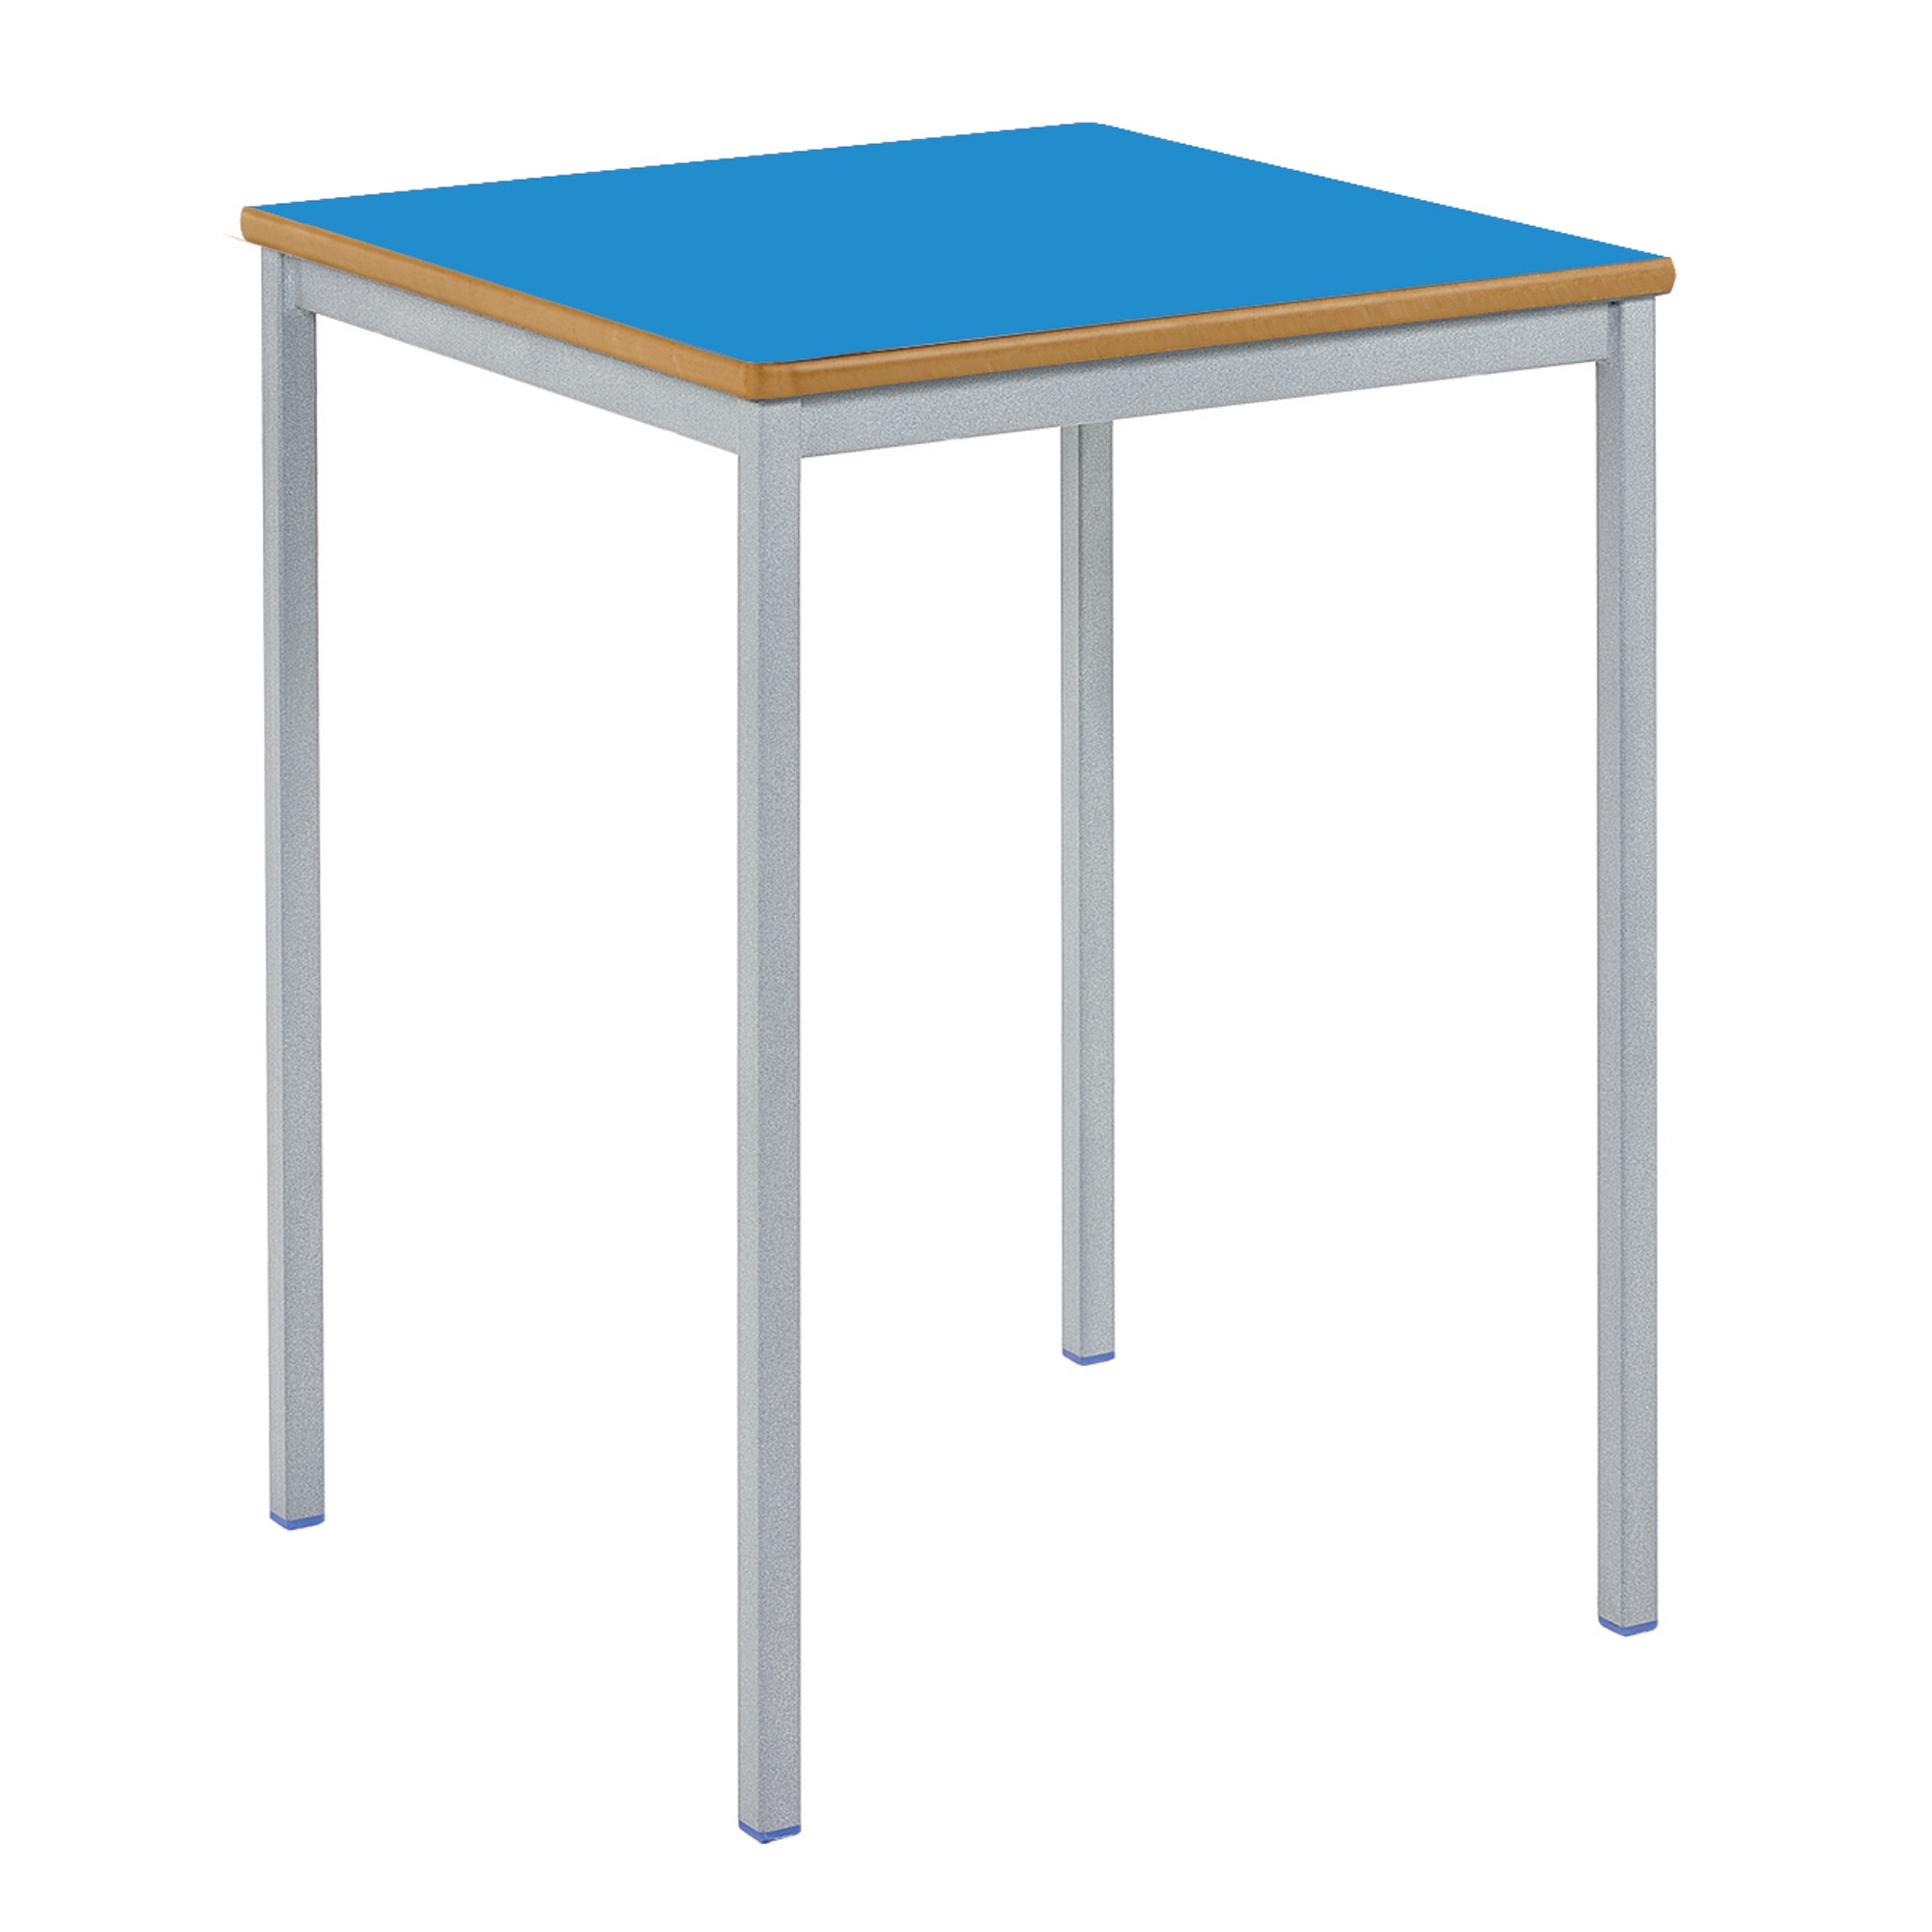 Classmates Square Fully Welded Classroom Table - 600 x 600 x 640mm - Blue